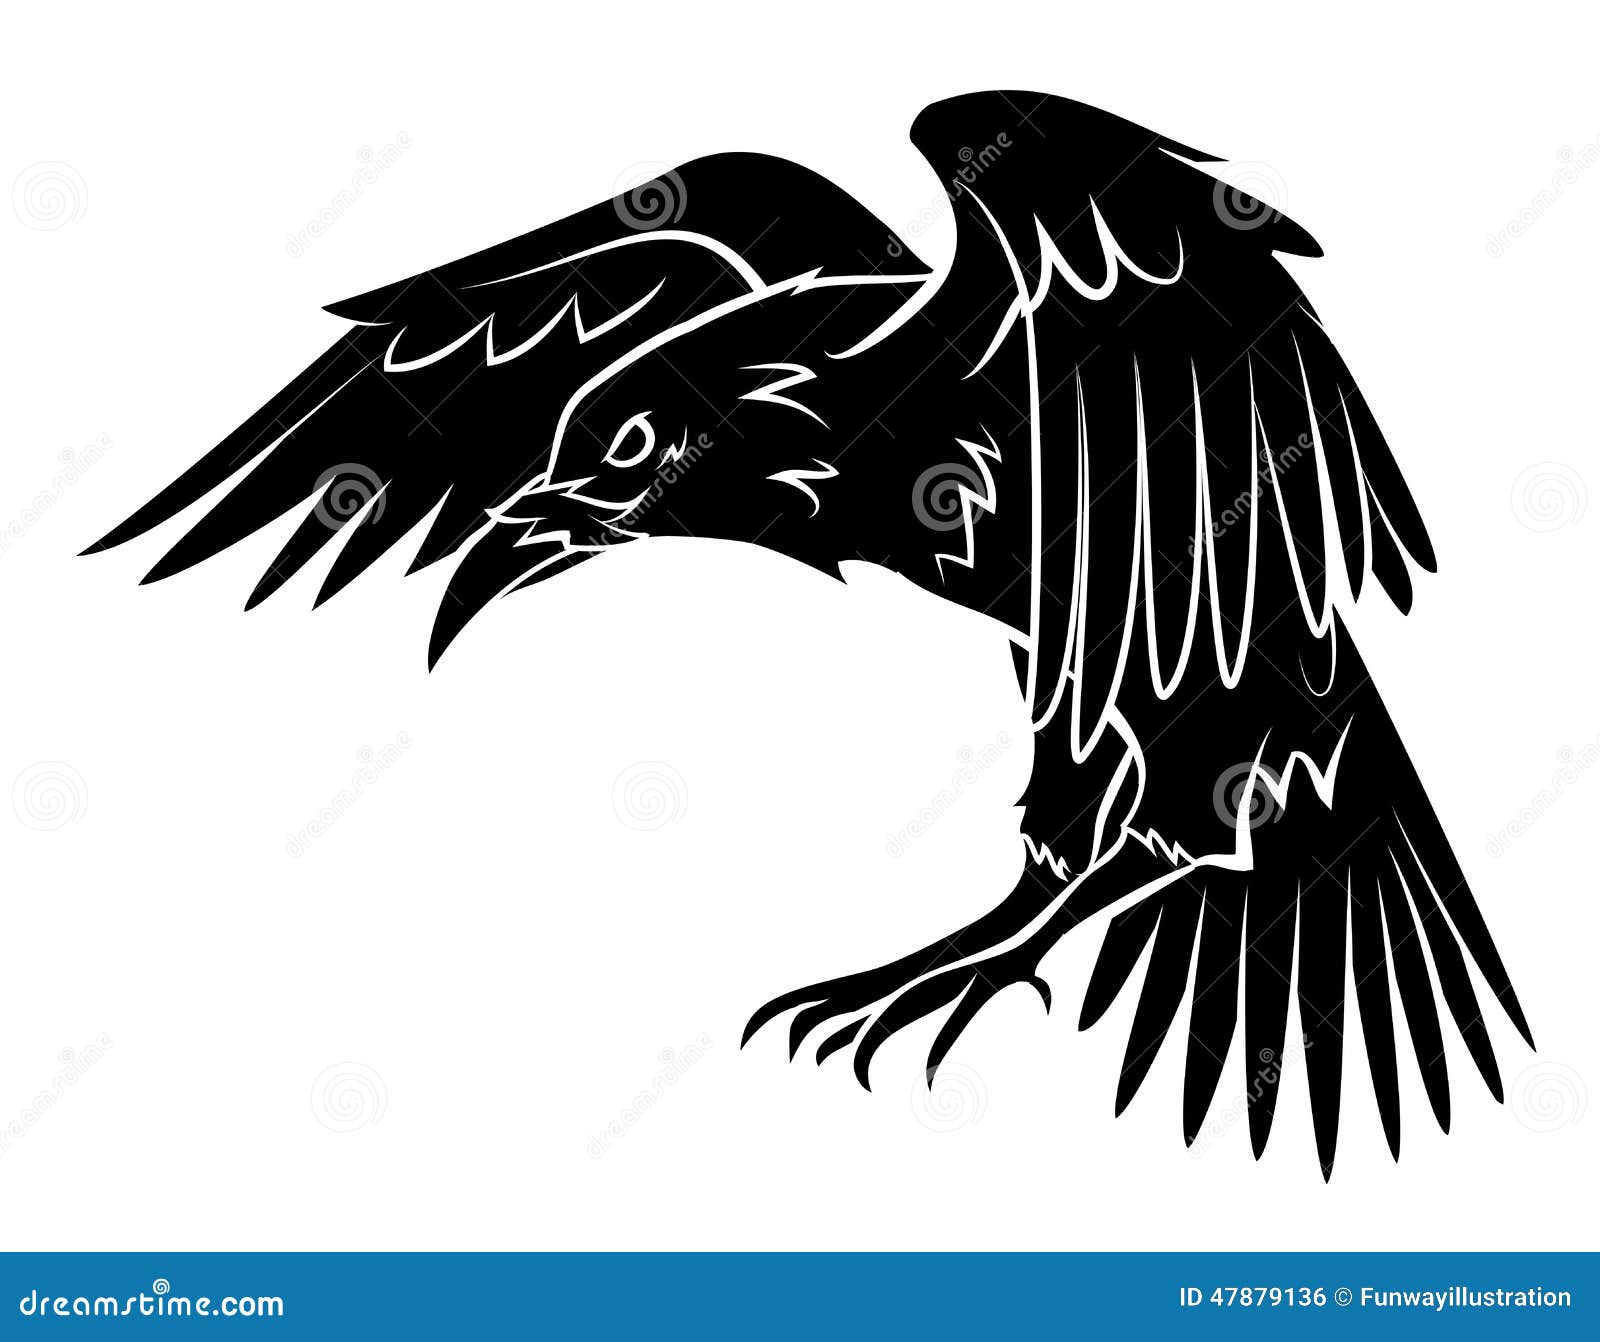 Download Raven stock vector. Illustration of abstract, design - 47879136